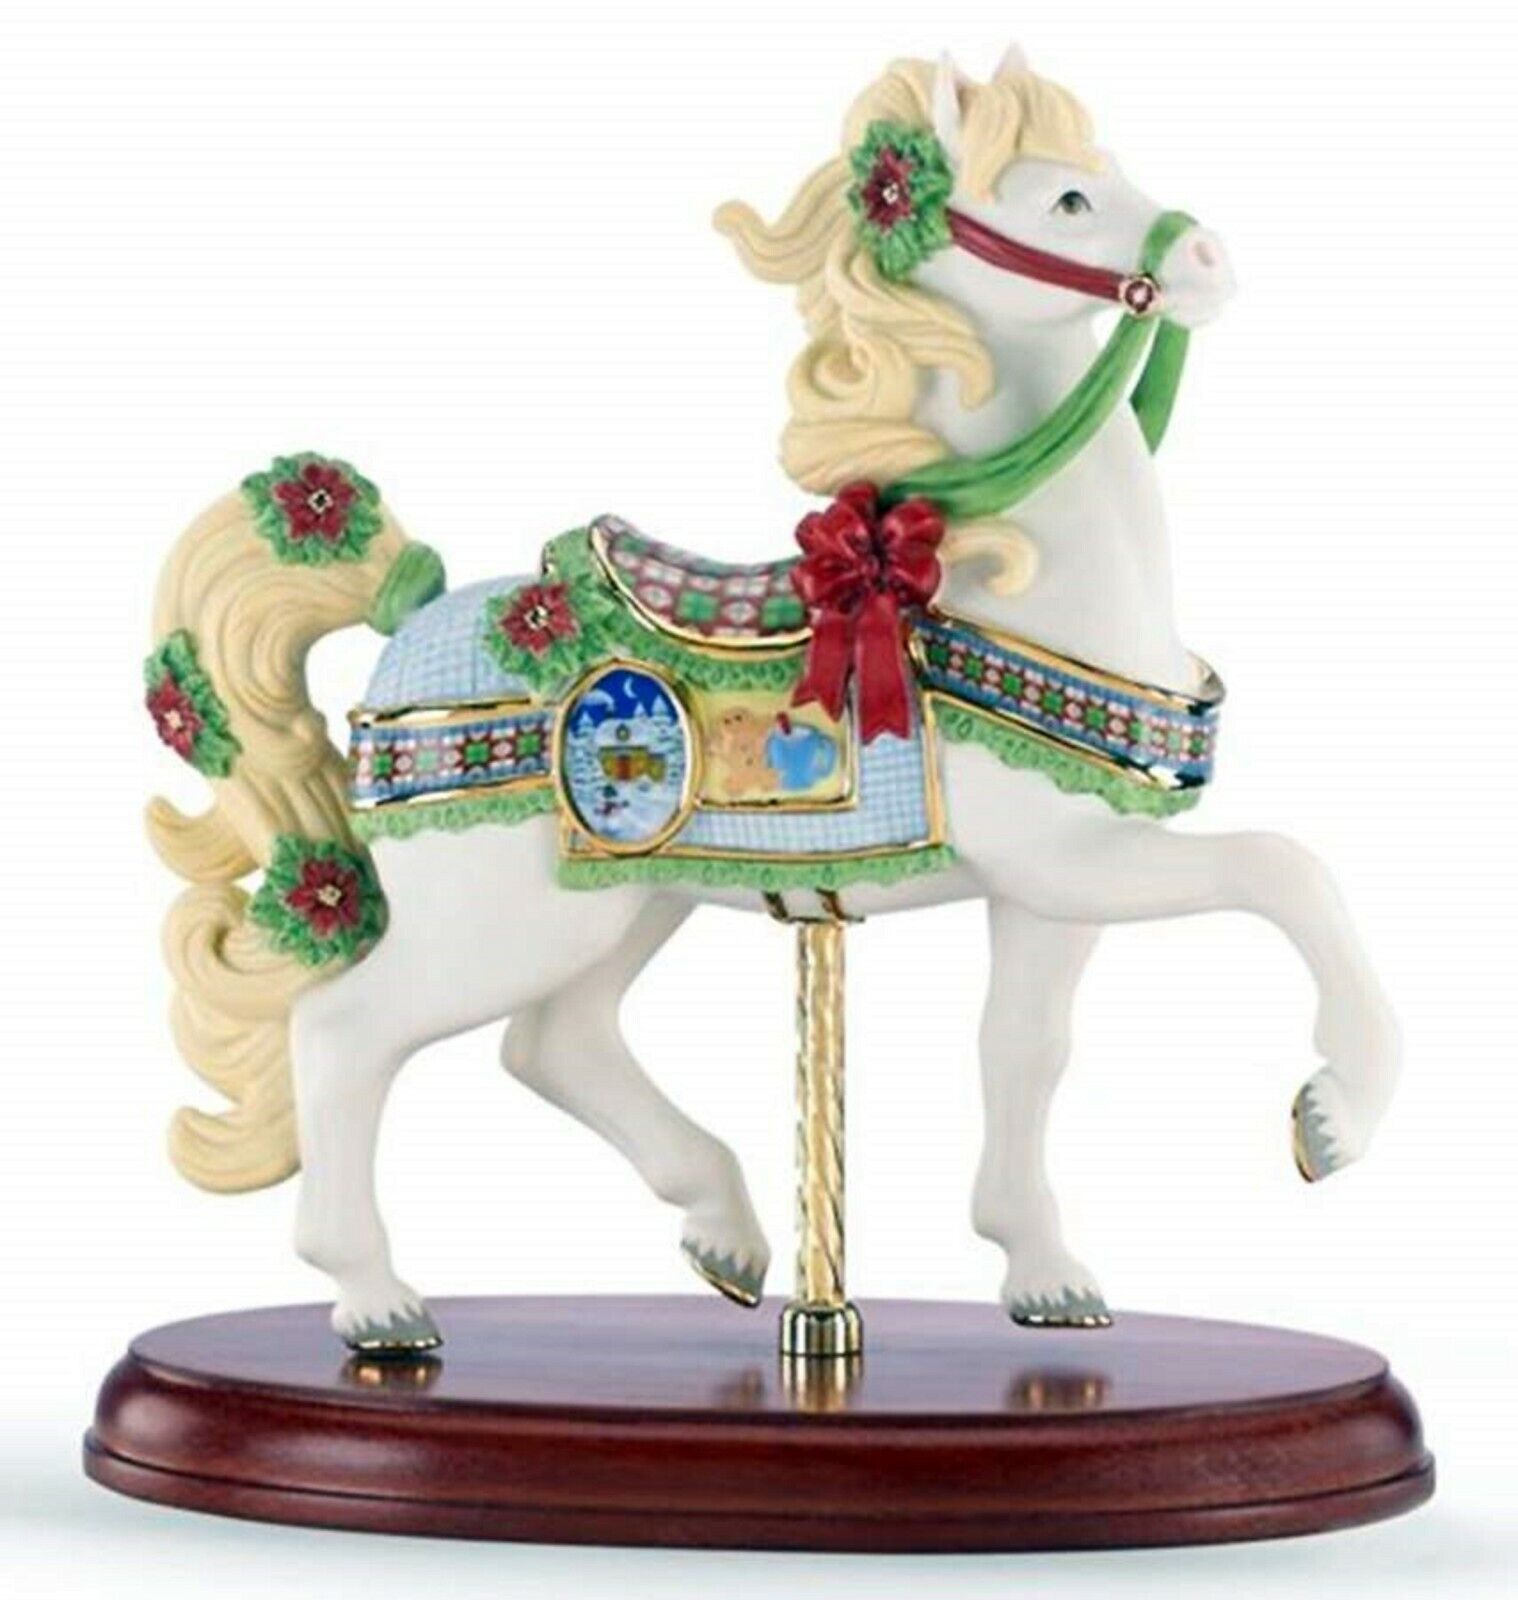 Primary image for Lenox Christmas Gingerbread Carousel Horse Figurine Annual Poinsettias 2014 NEW